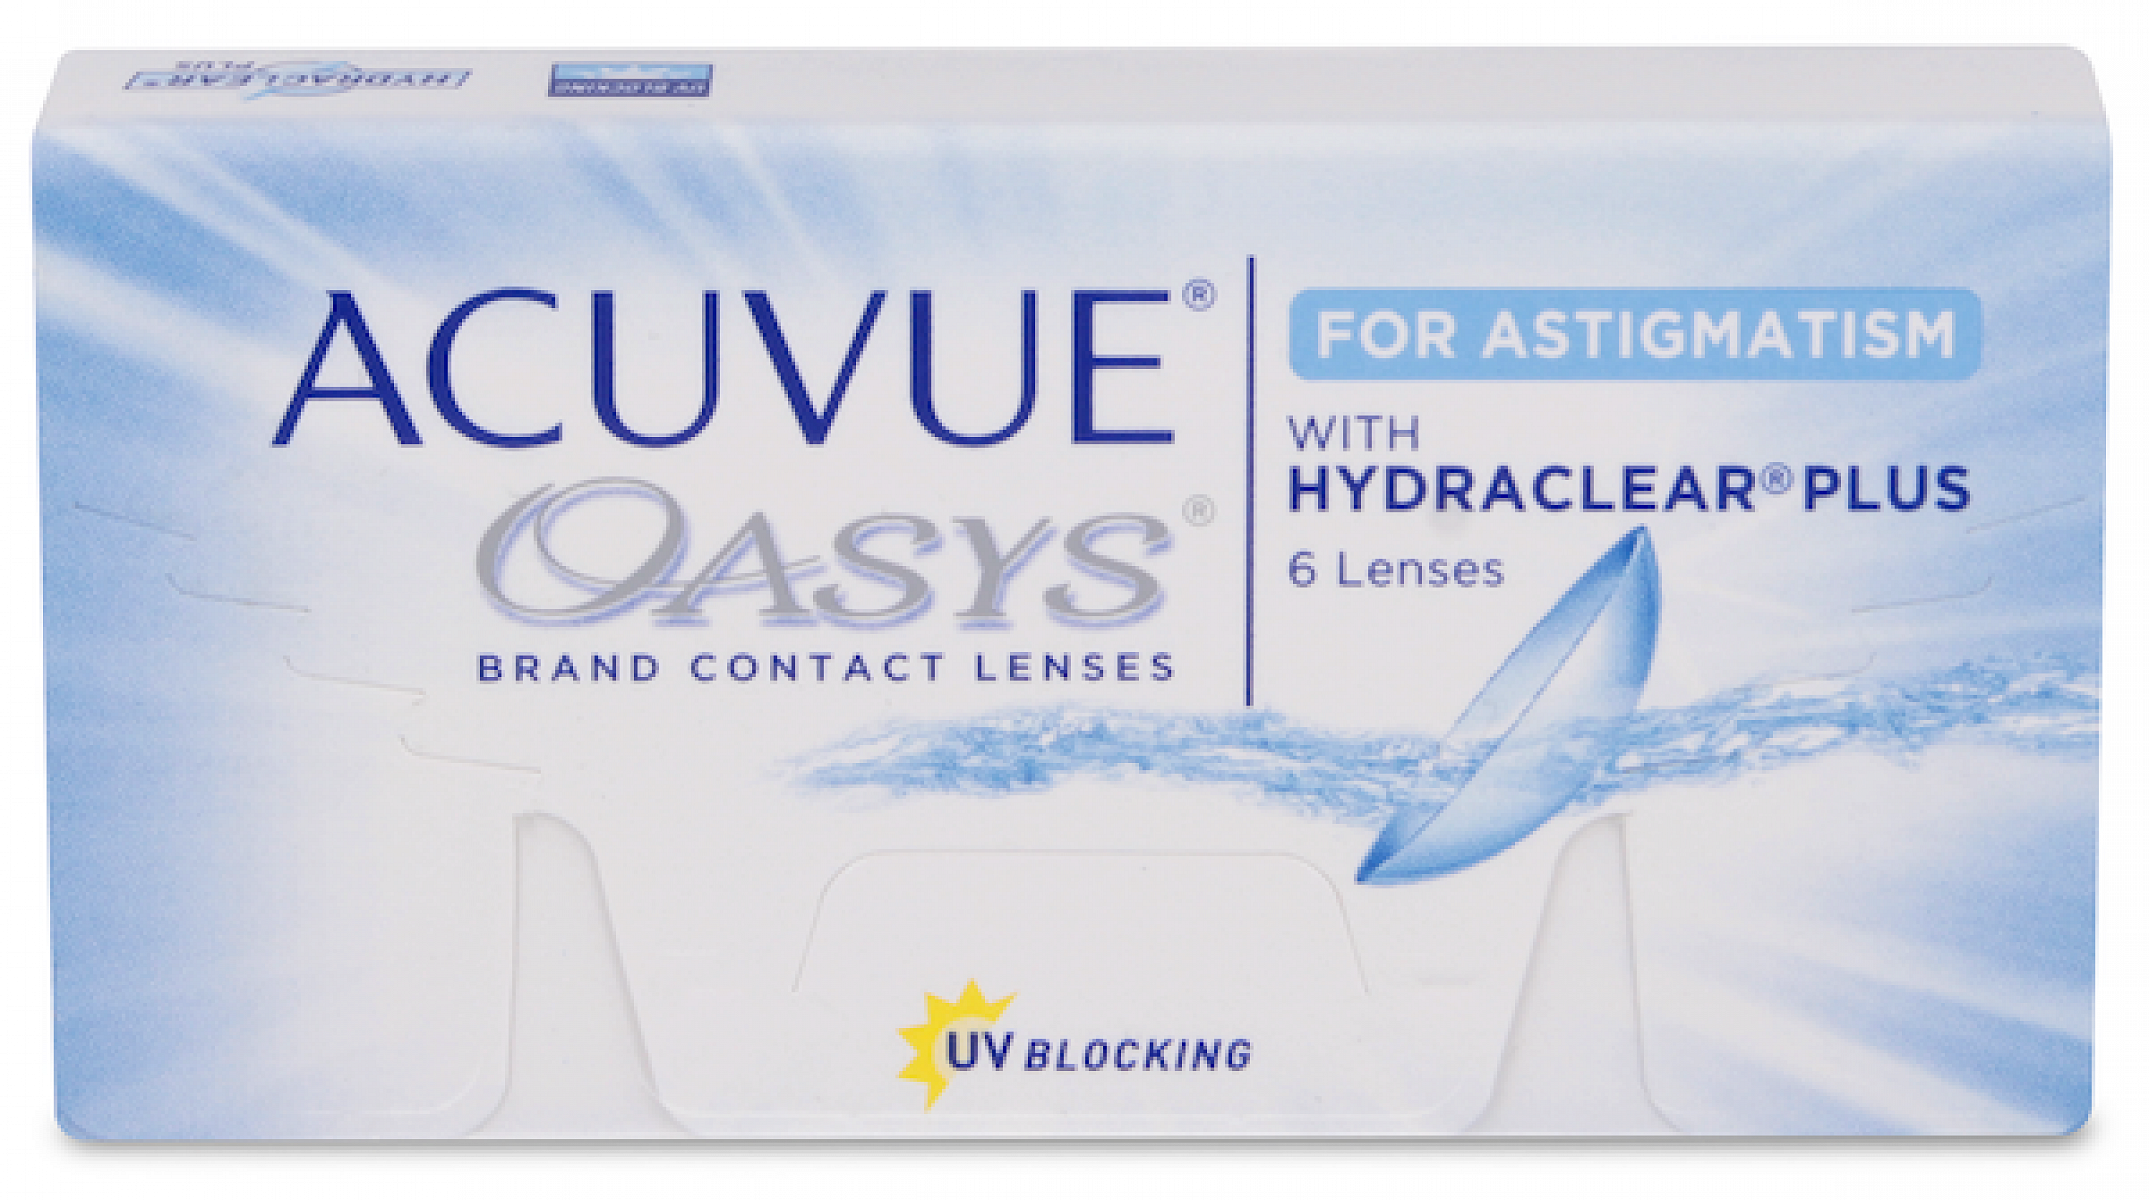 acuvue-oasys-with-hydraclear-plus-for-astigmatism-6-ks-fovea-cz